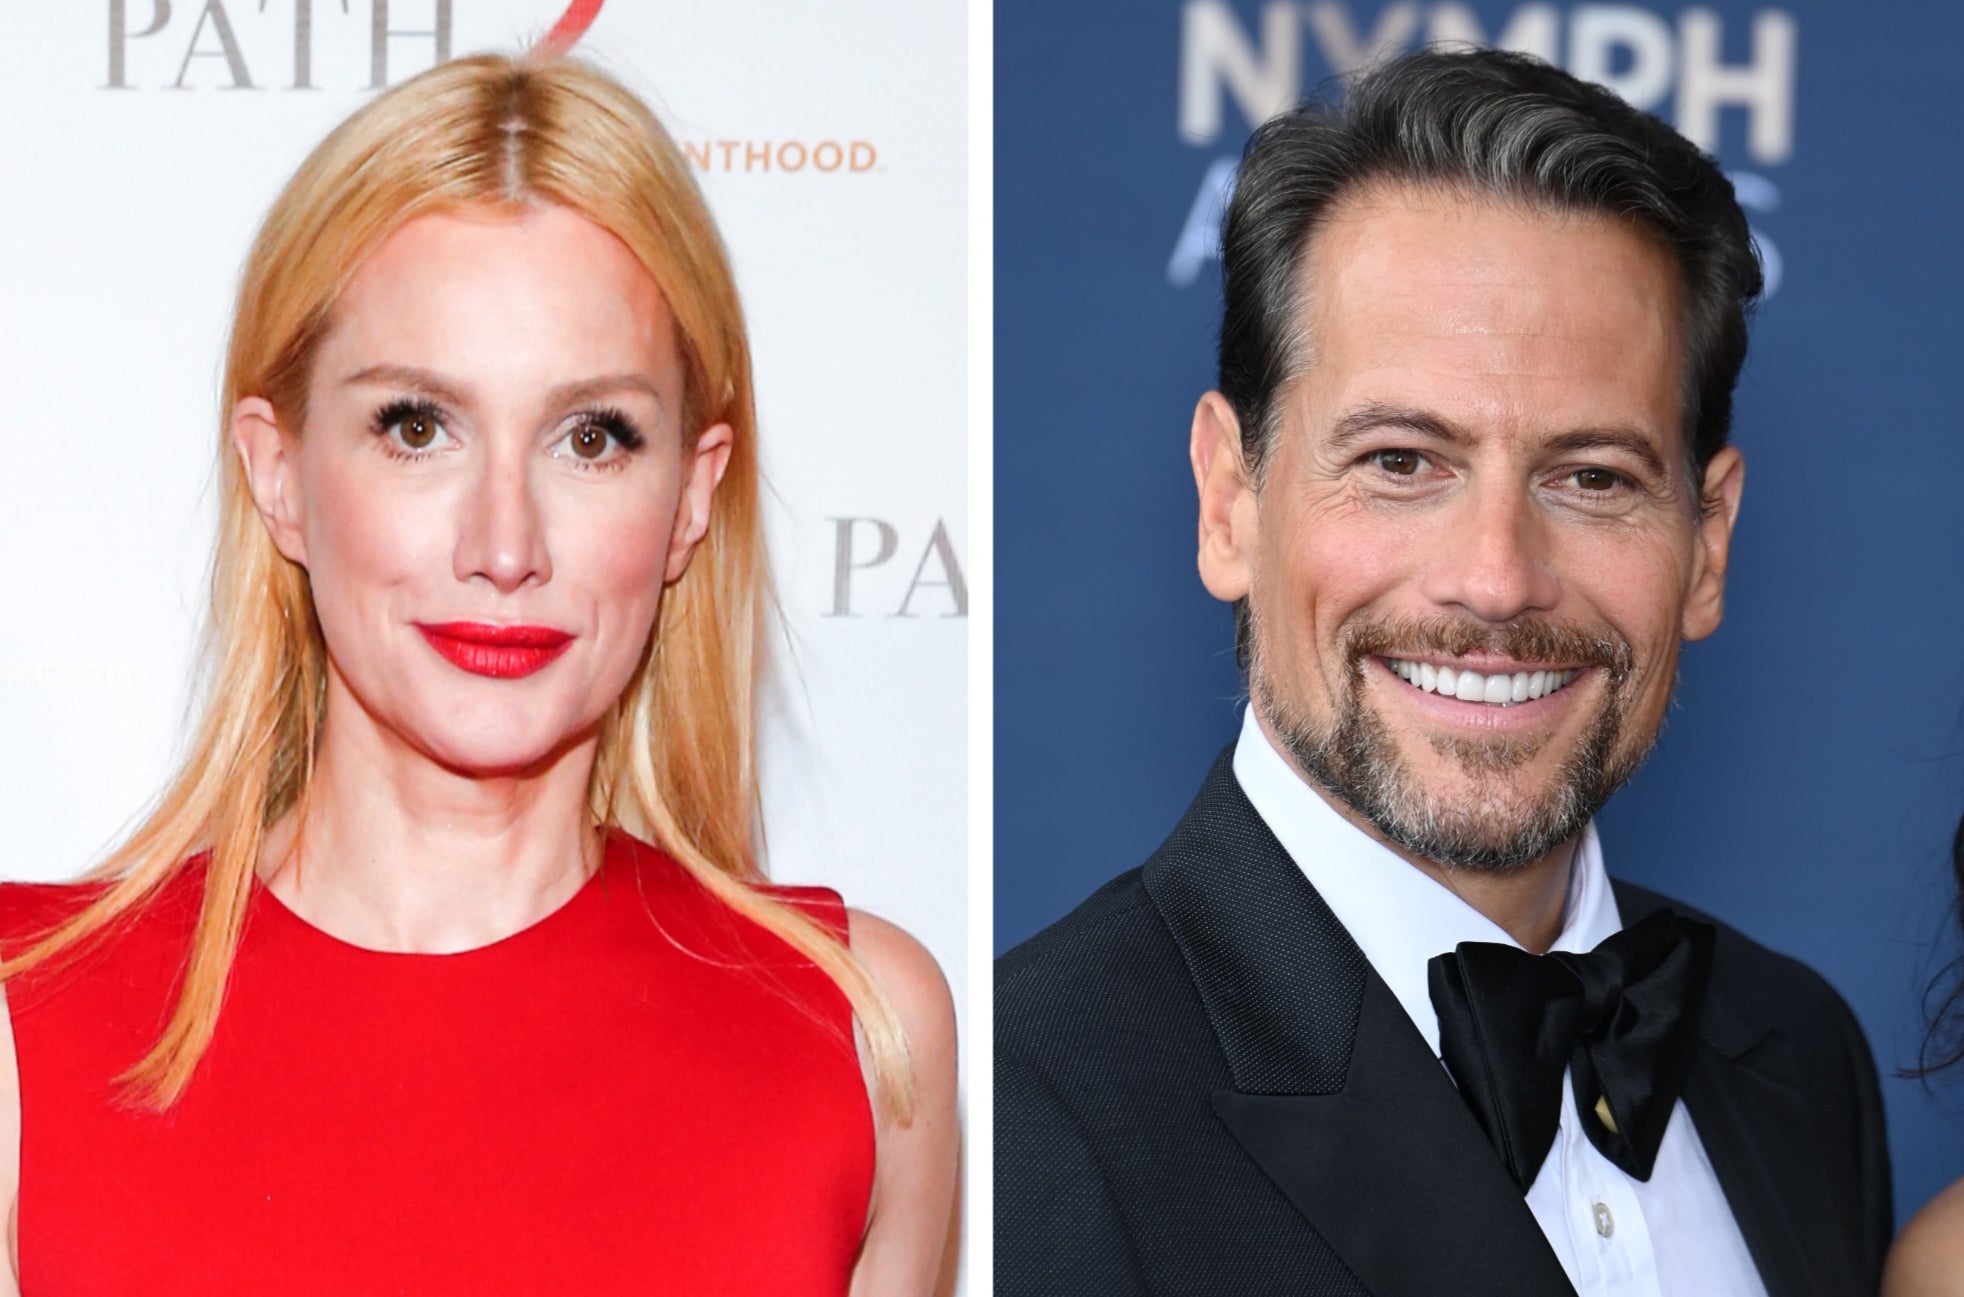 alice evans, ioan gruffudd, divorce, hollywood, alice evans ‘applying for food stamps’ as she accuses ex ioan gruffudd of living ‘lavish lifestyle’